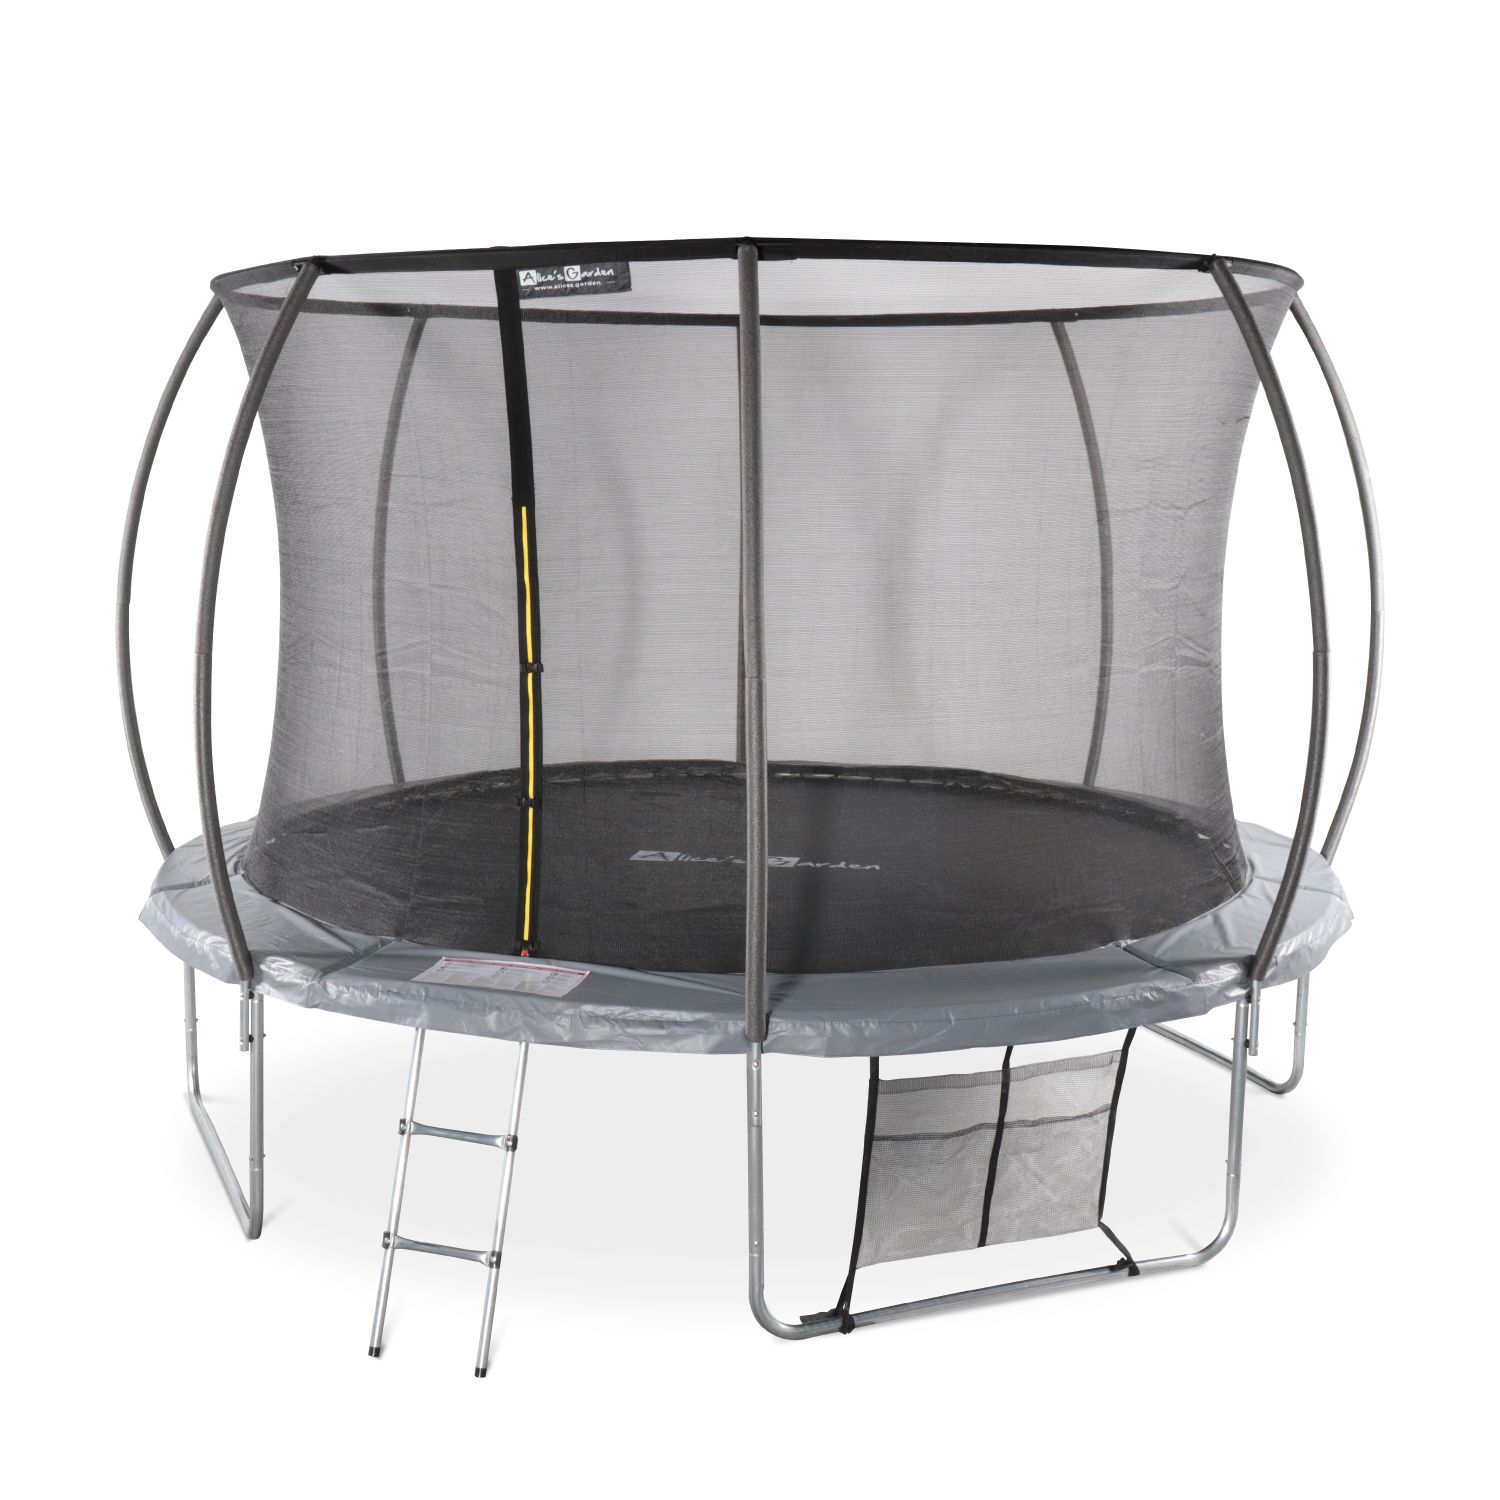 12FT TRAMPOLINE WITH ACCESSORIES KIT - SATURNE INNER